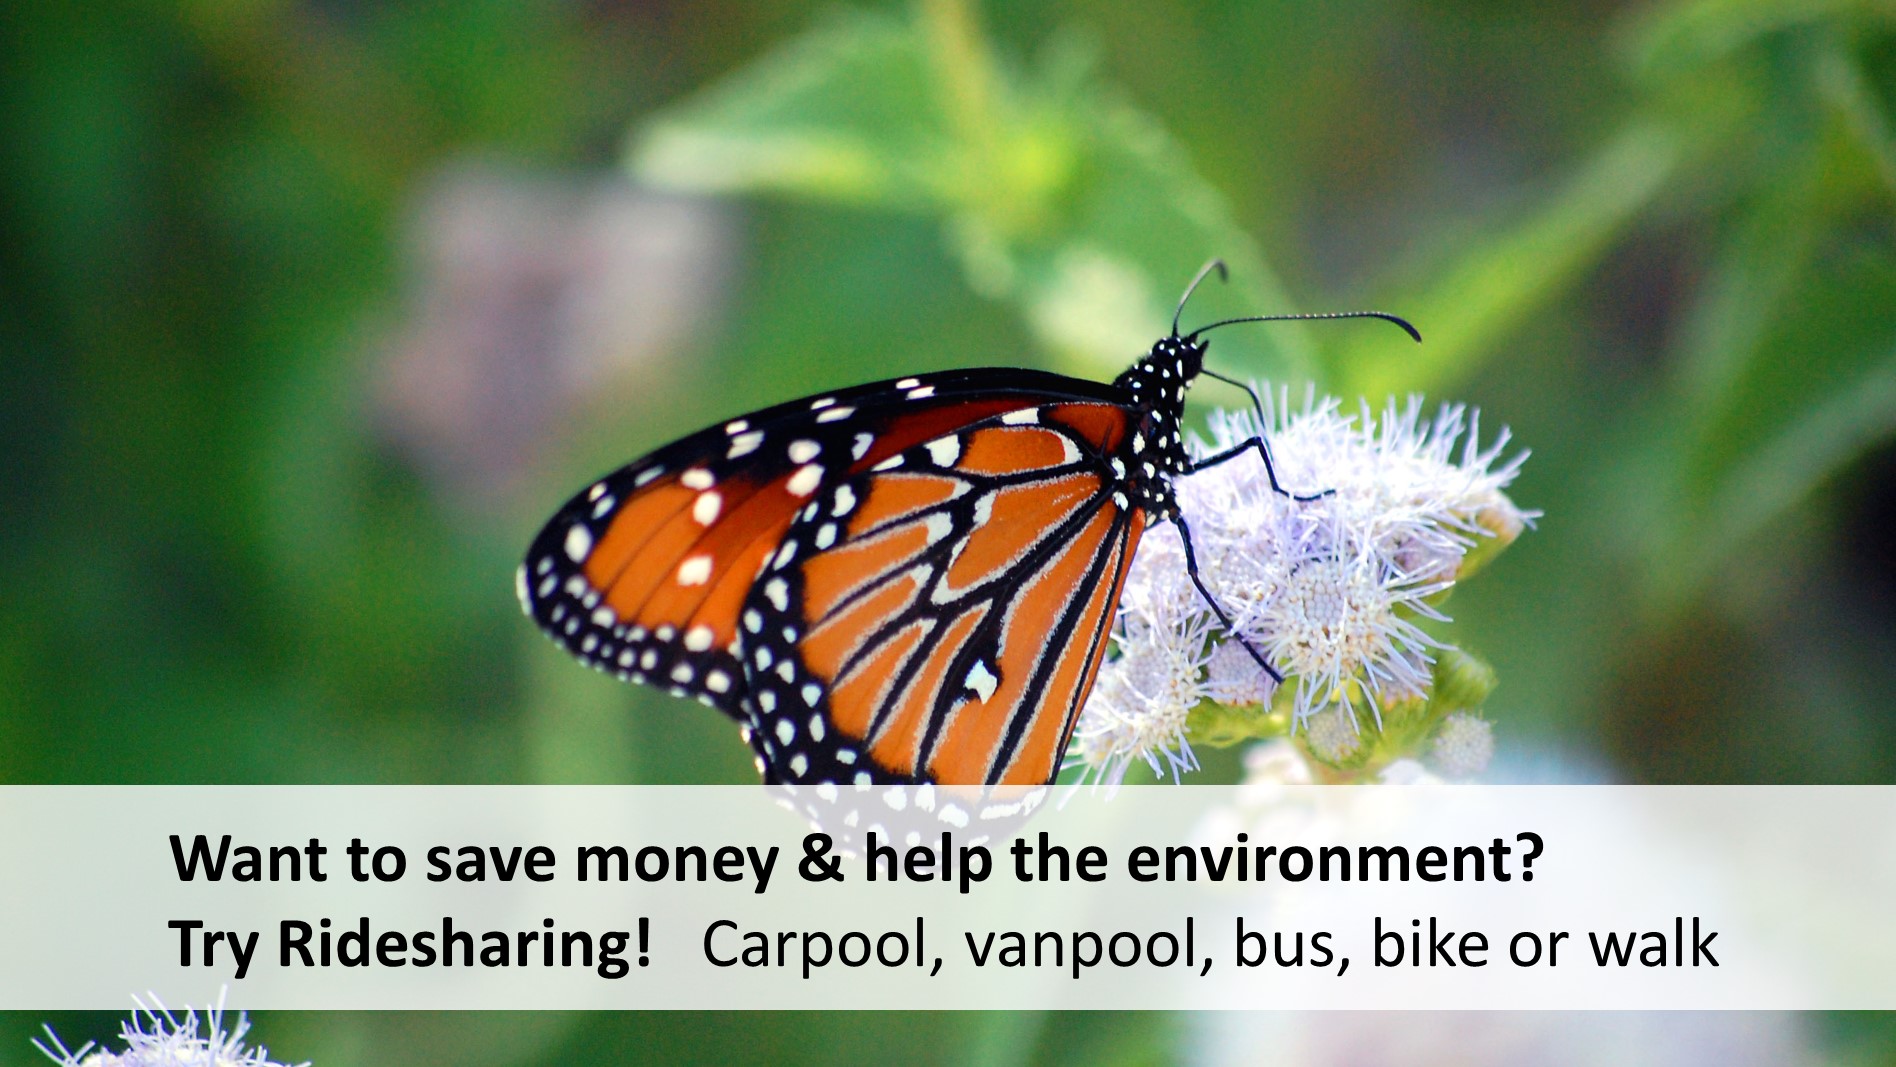 Save money and help the environment by ridesharing